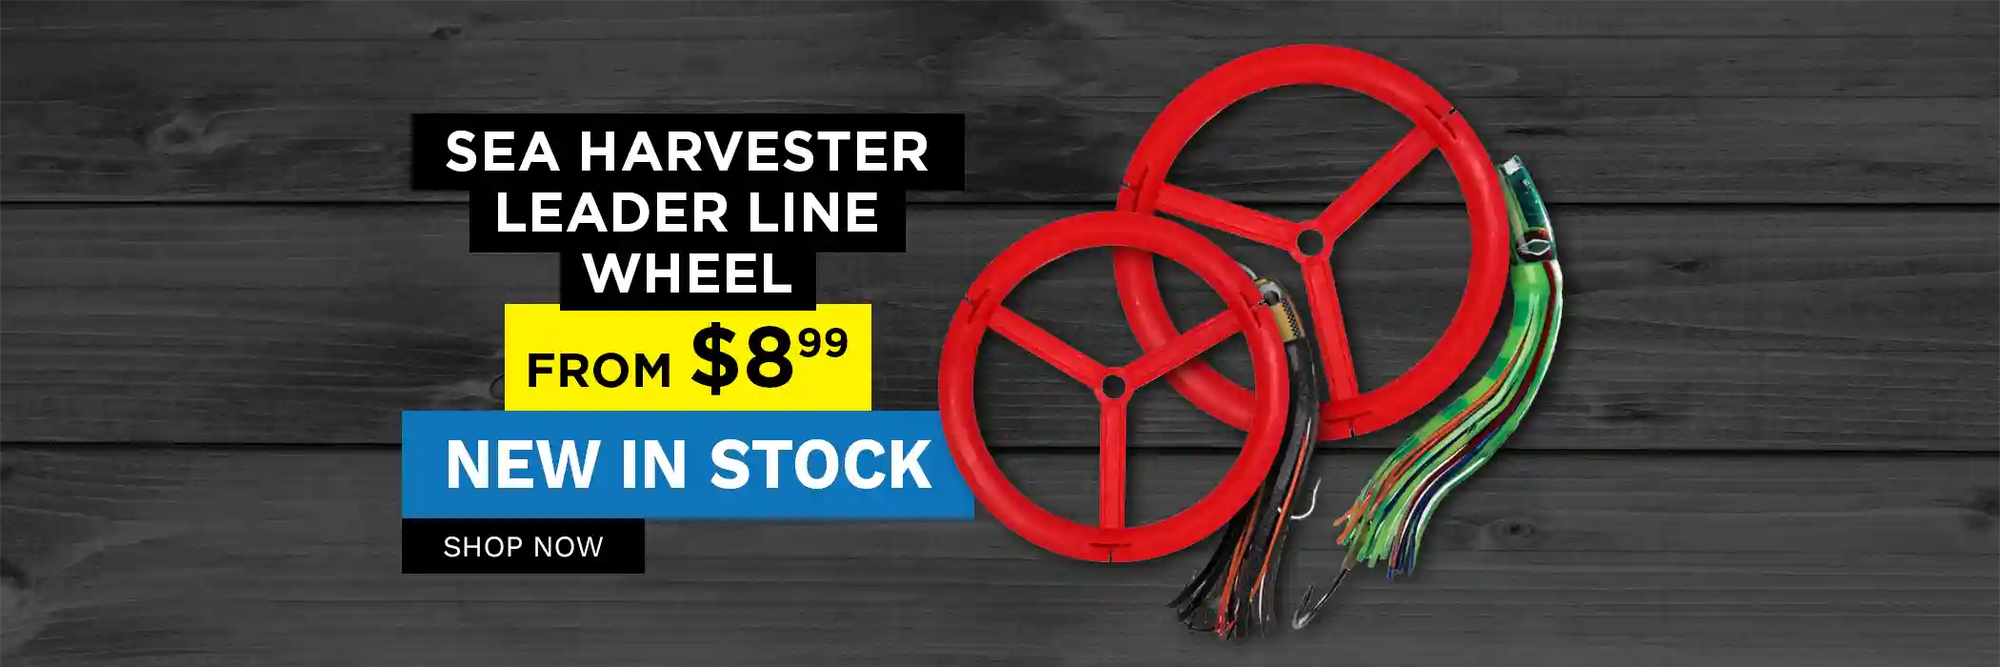 Sea Harvester Leader Line Wheel from $8.99 New in Stock